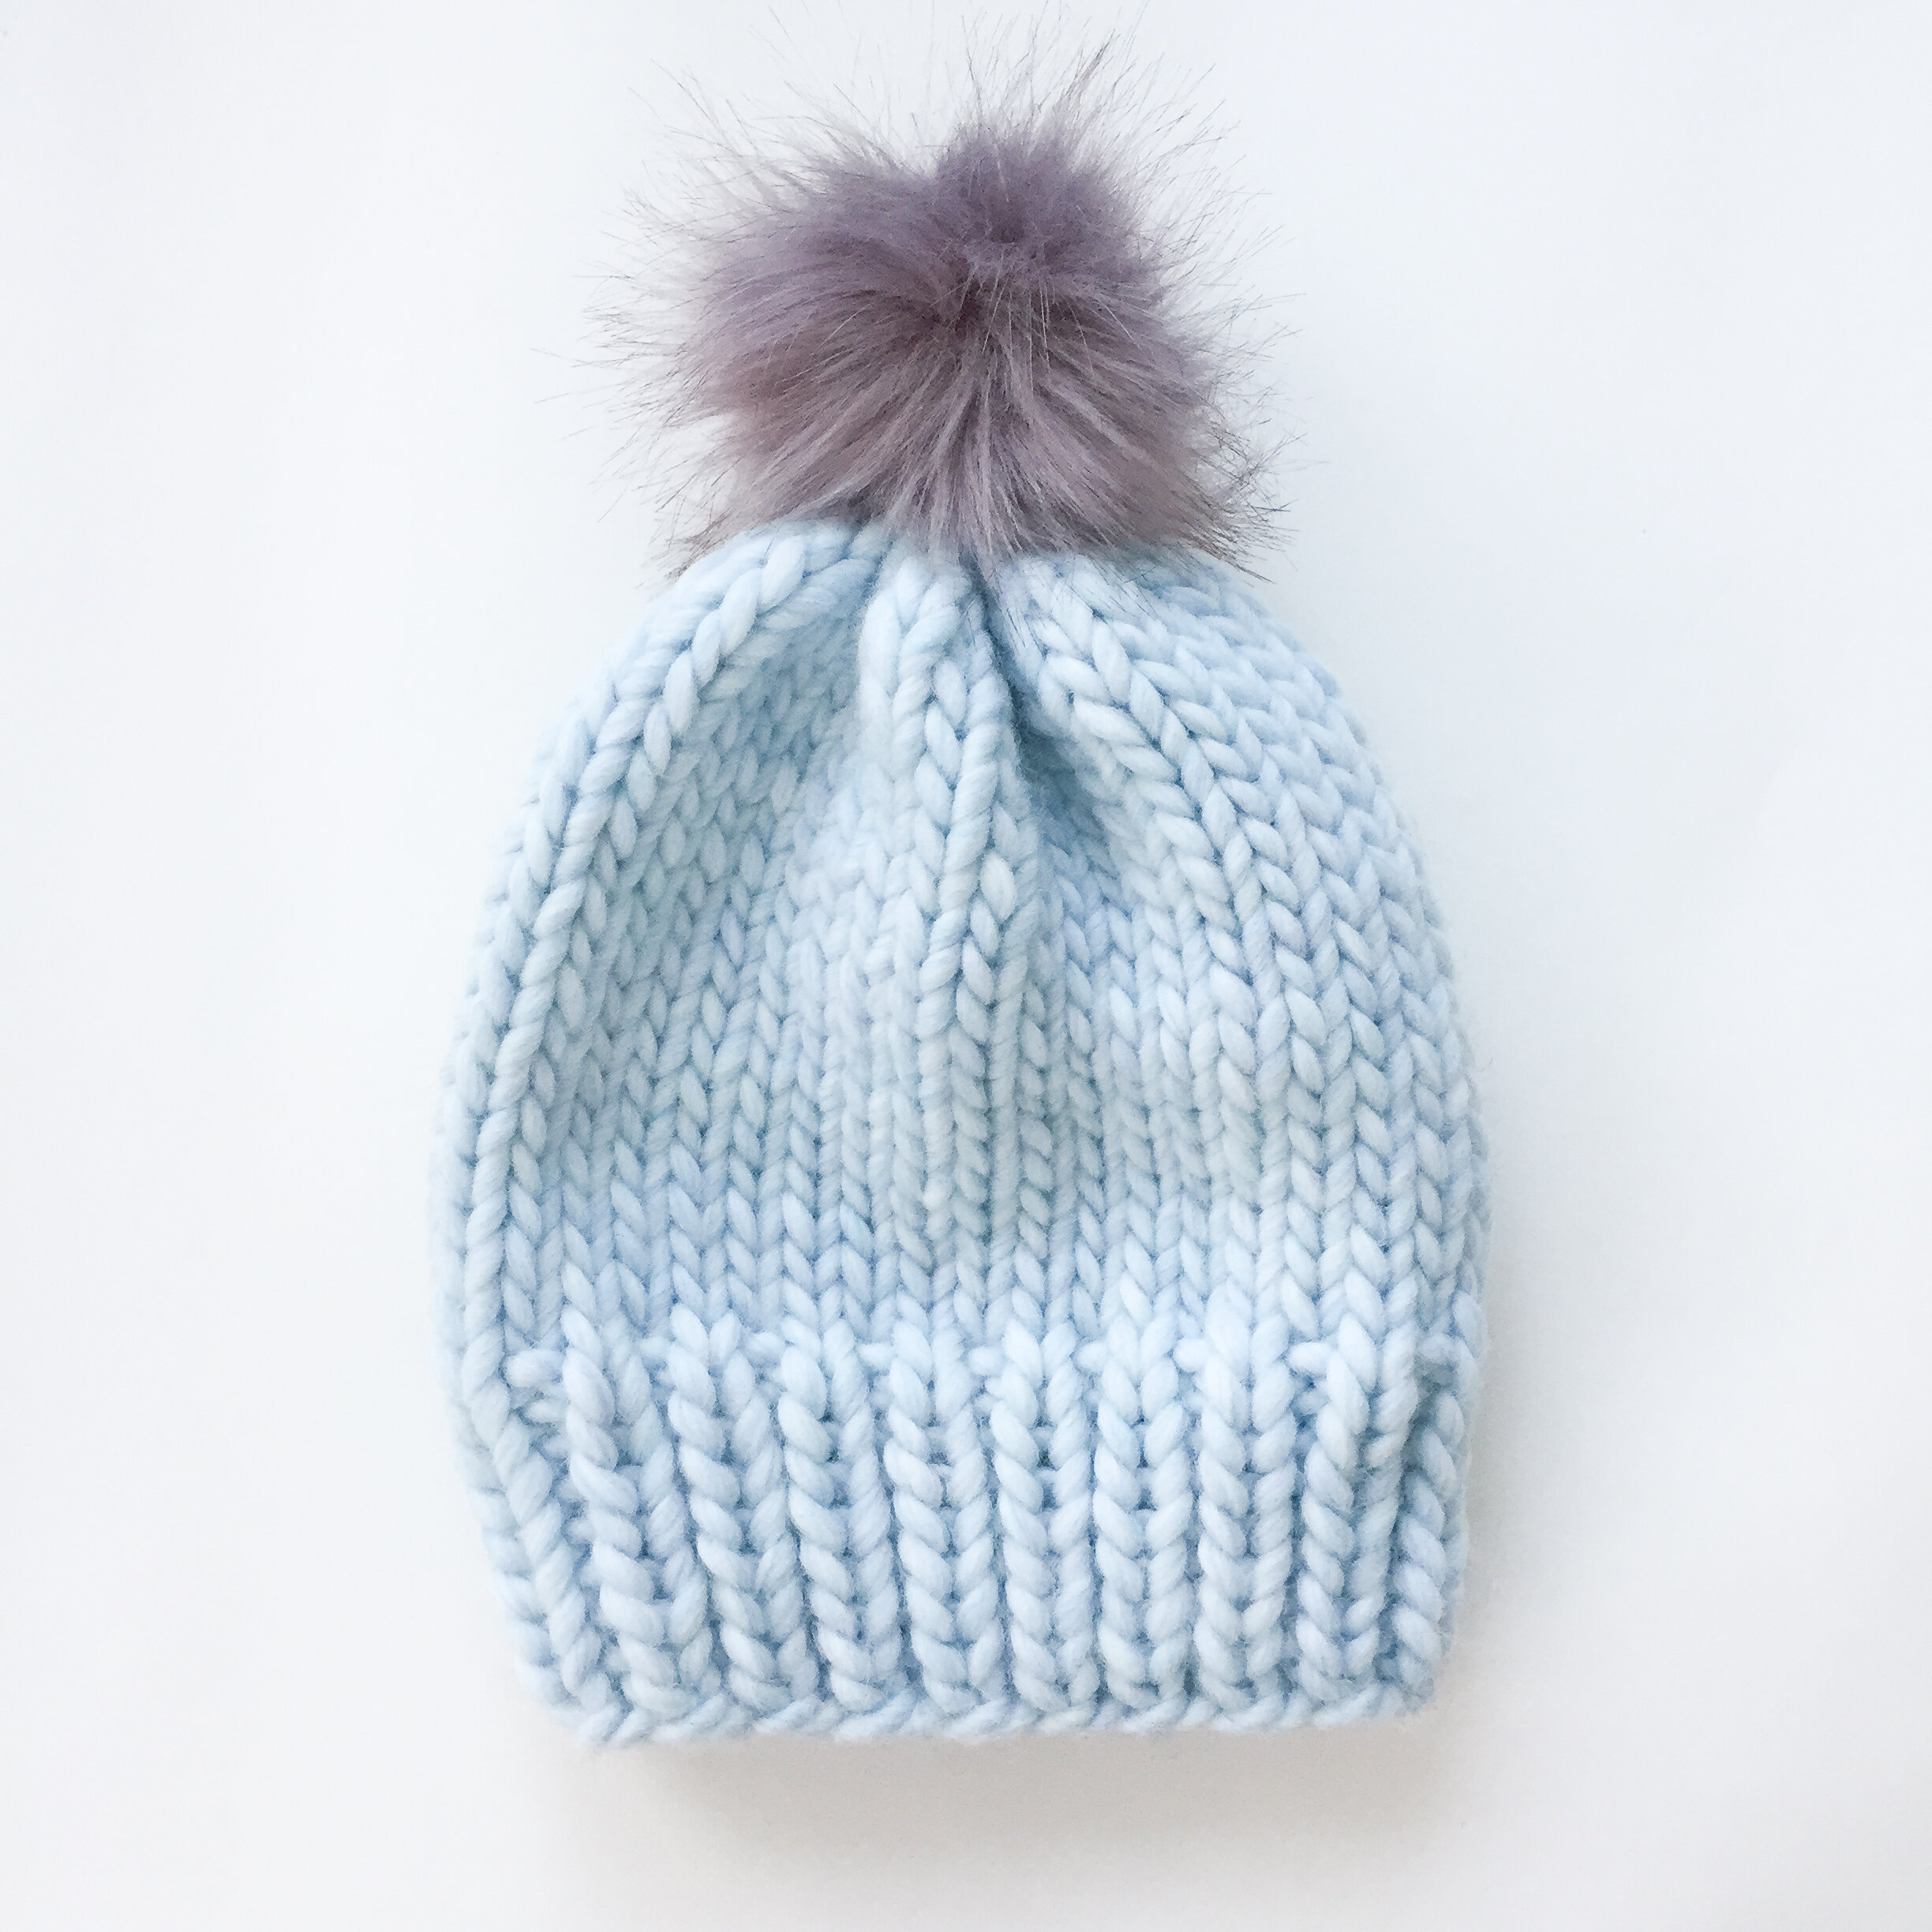 Knit hat pattern with video tutorials Simple hat Knitting pattern